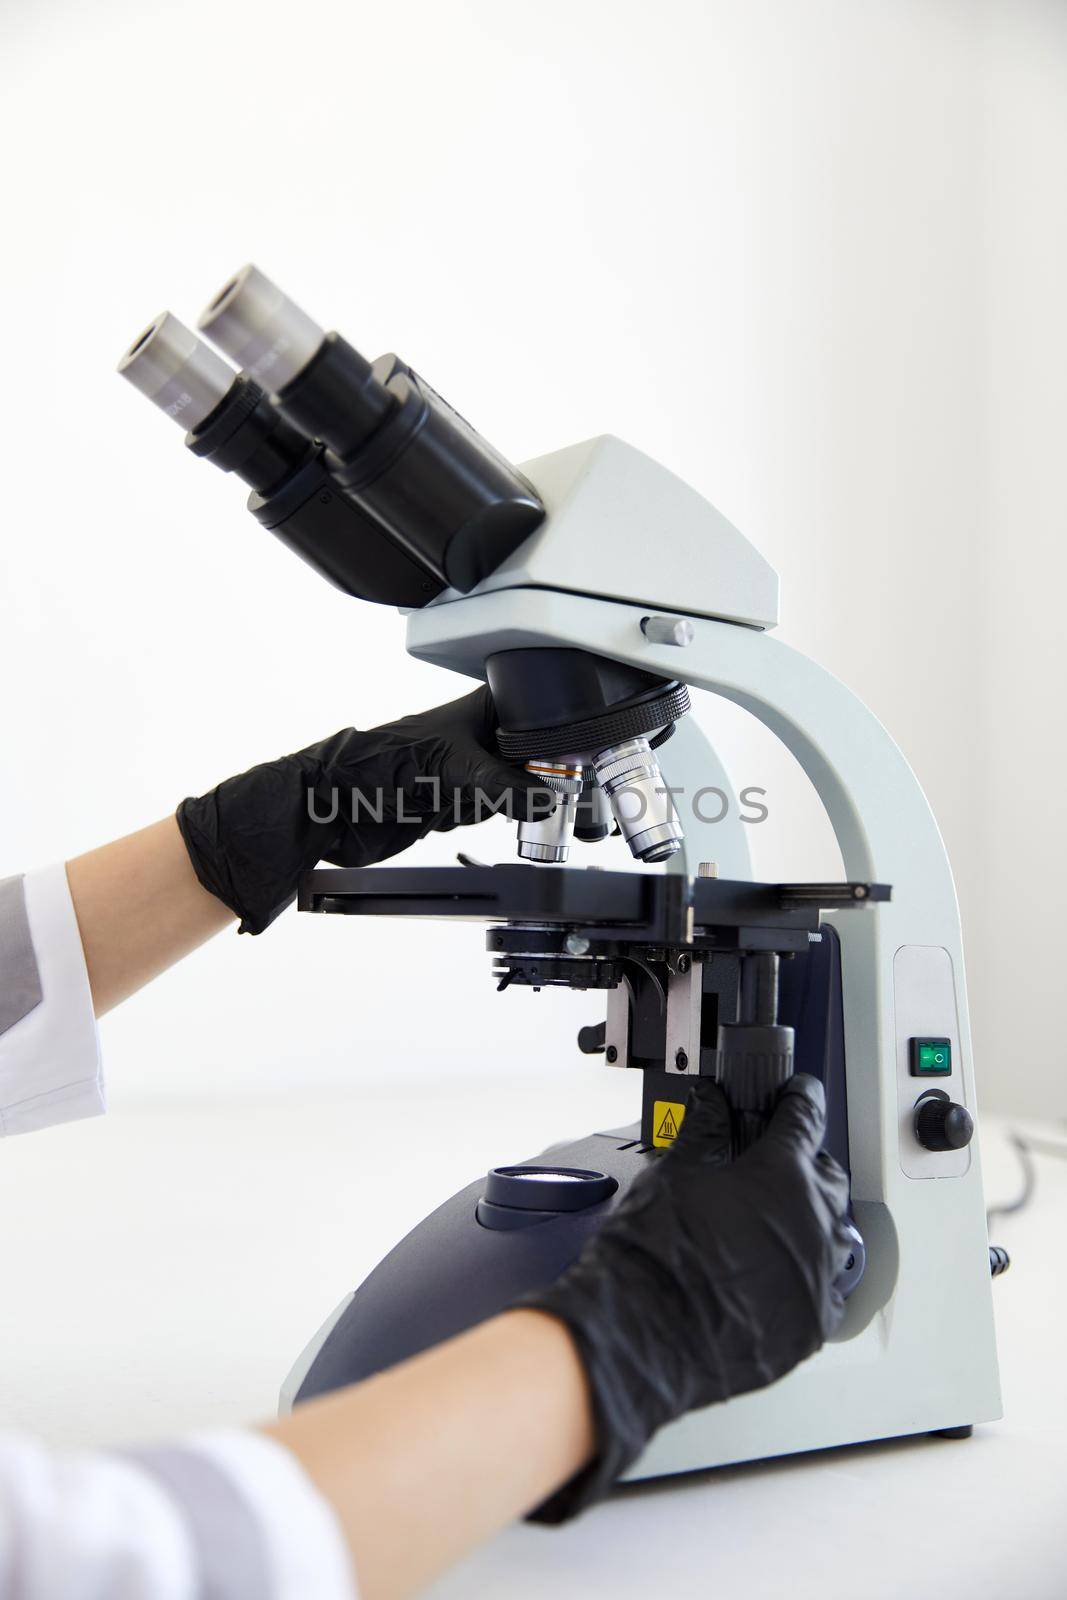 Closeup of microscope and hands wearing rubber gloves in modern laboratory . High quality photo